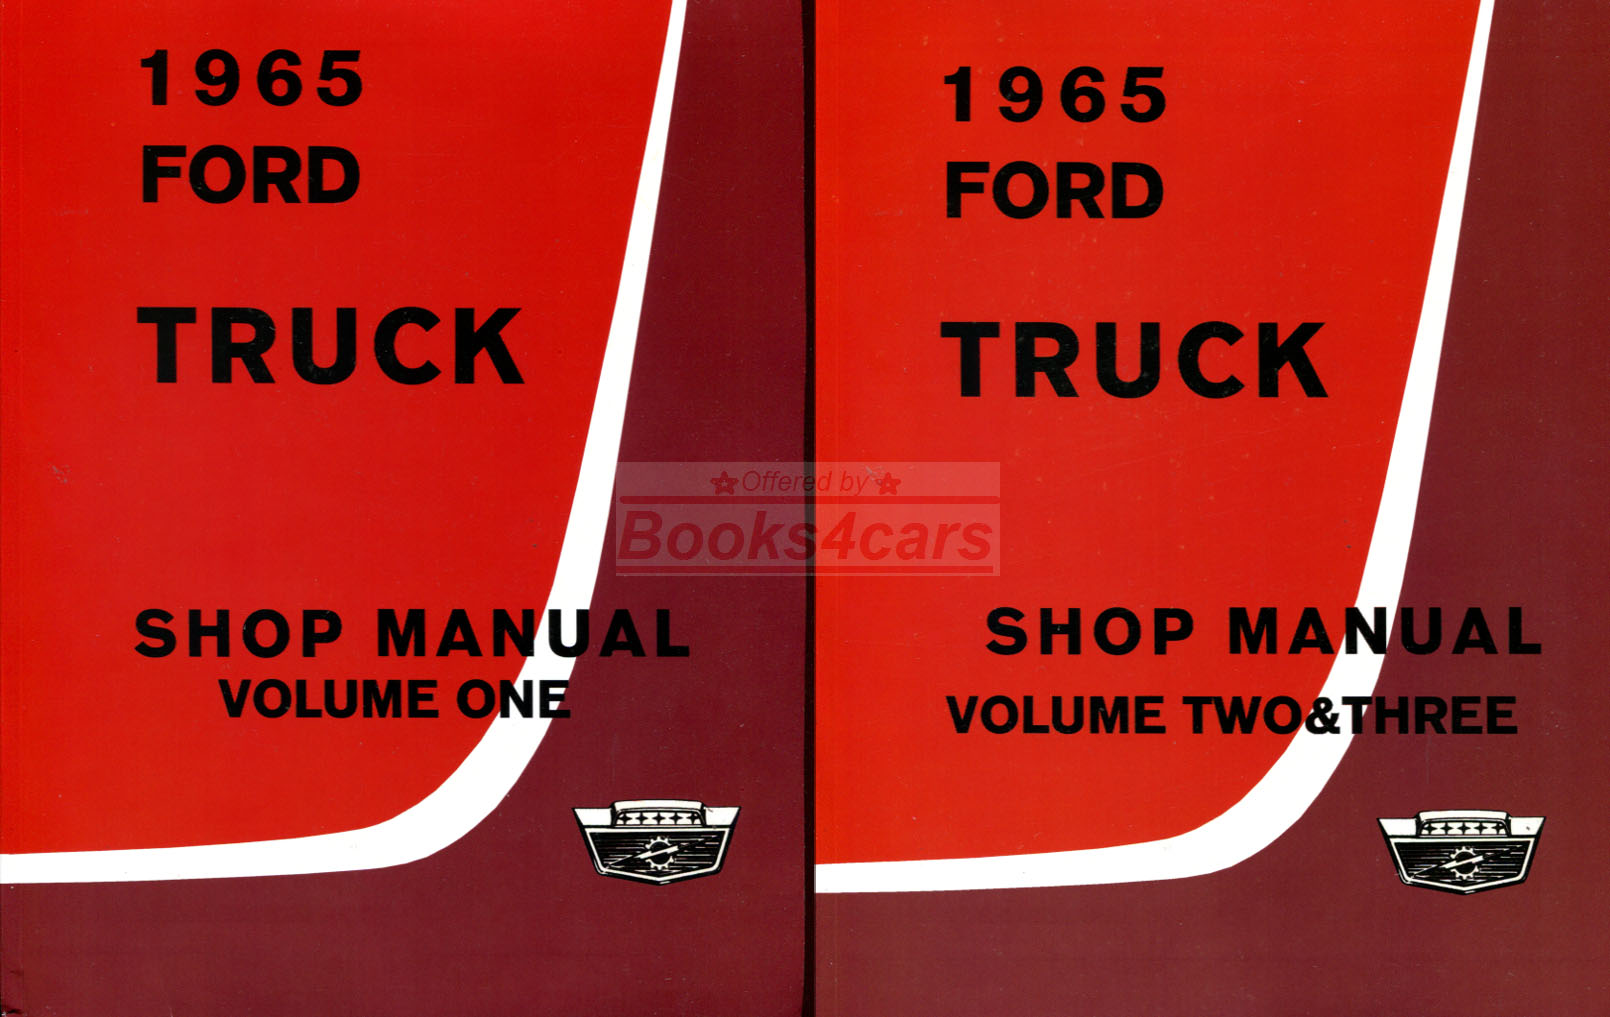 65 Truck Shop Service Repair Manual 3 volume set by Ford; 1,500 pages including F100 F150 F250 F350 through F750